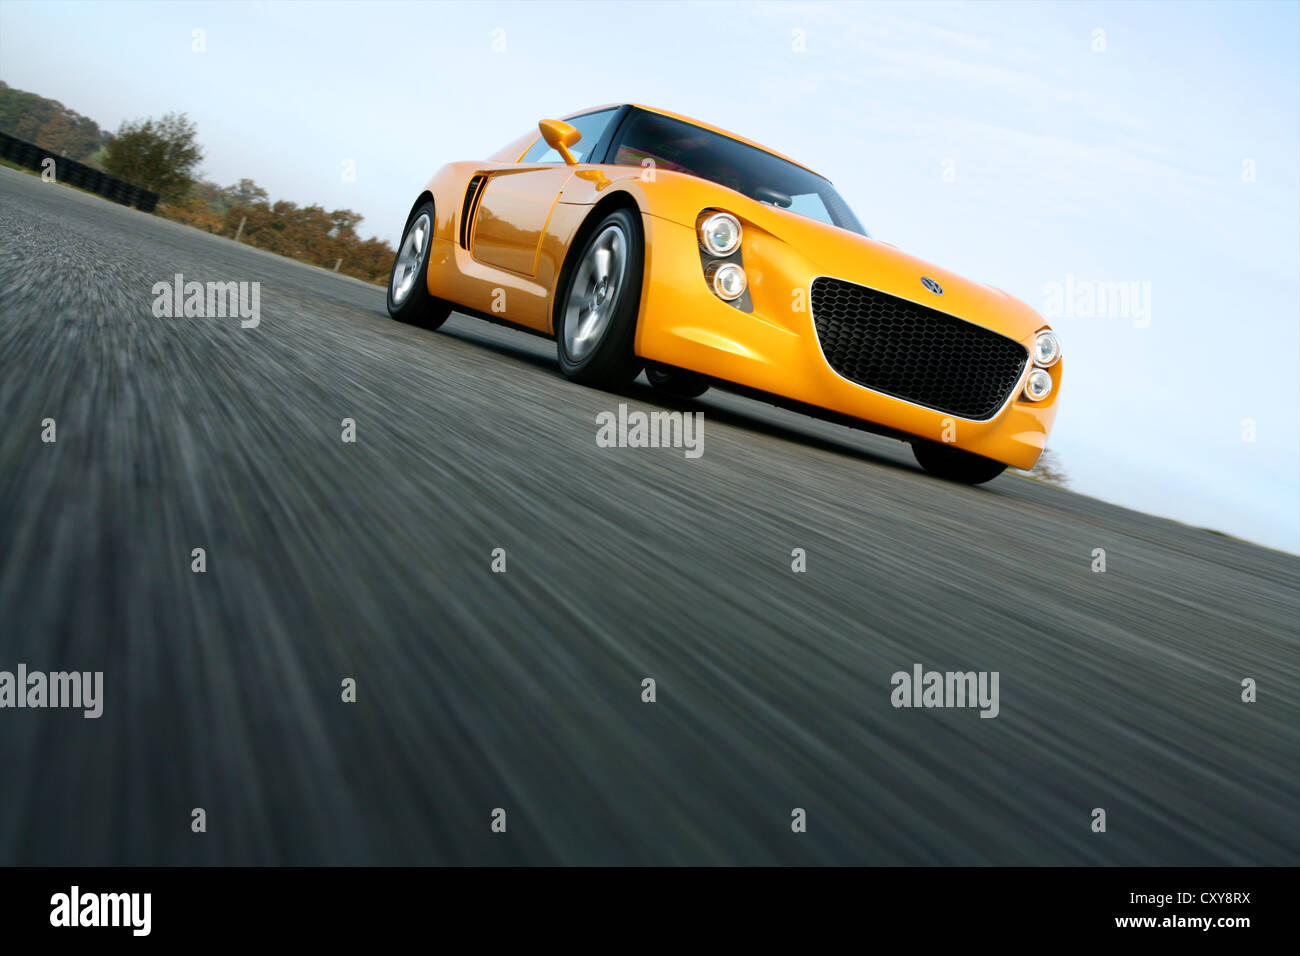 Low 3/4 view of sports concept car Stock Photo